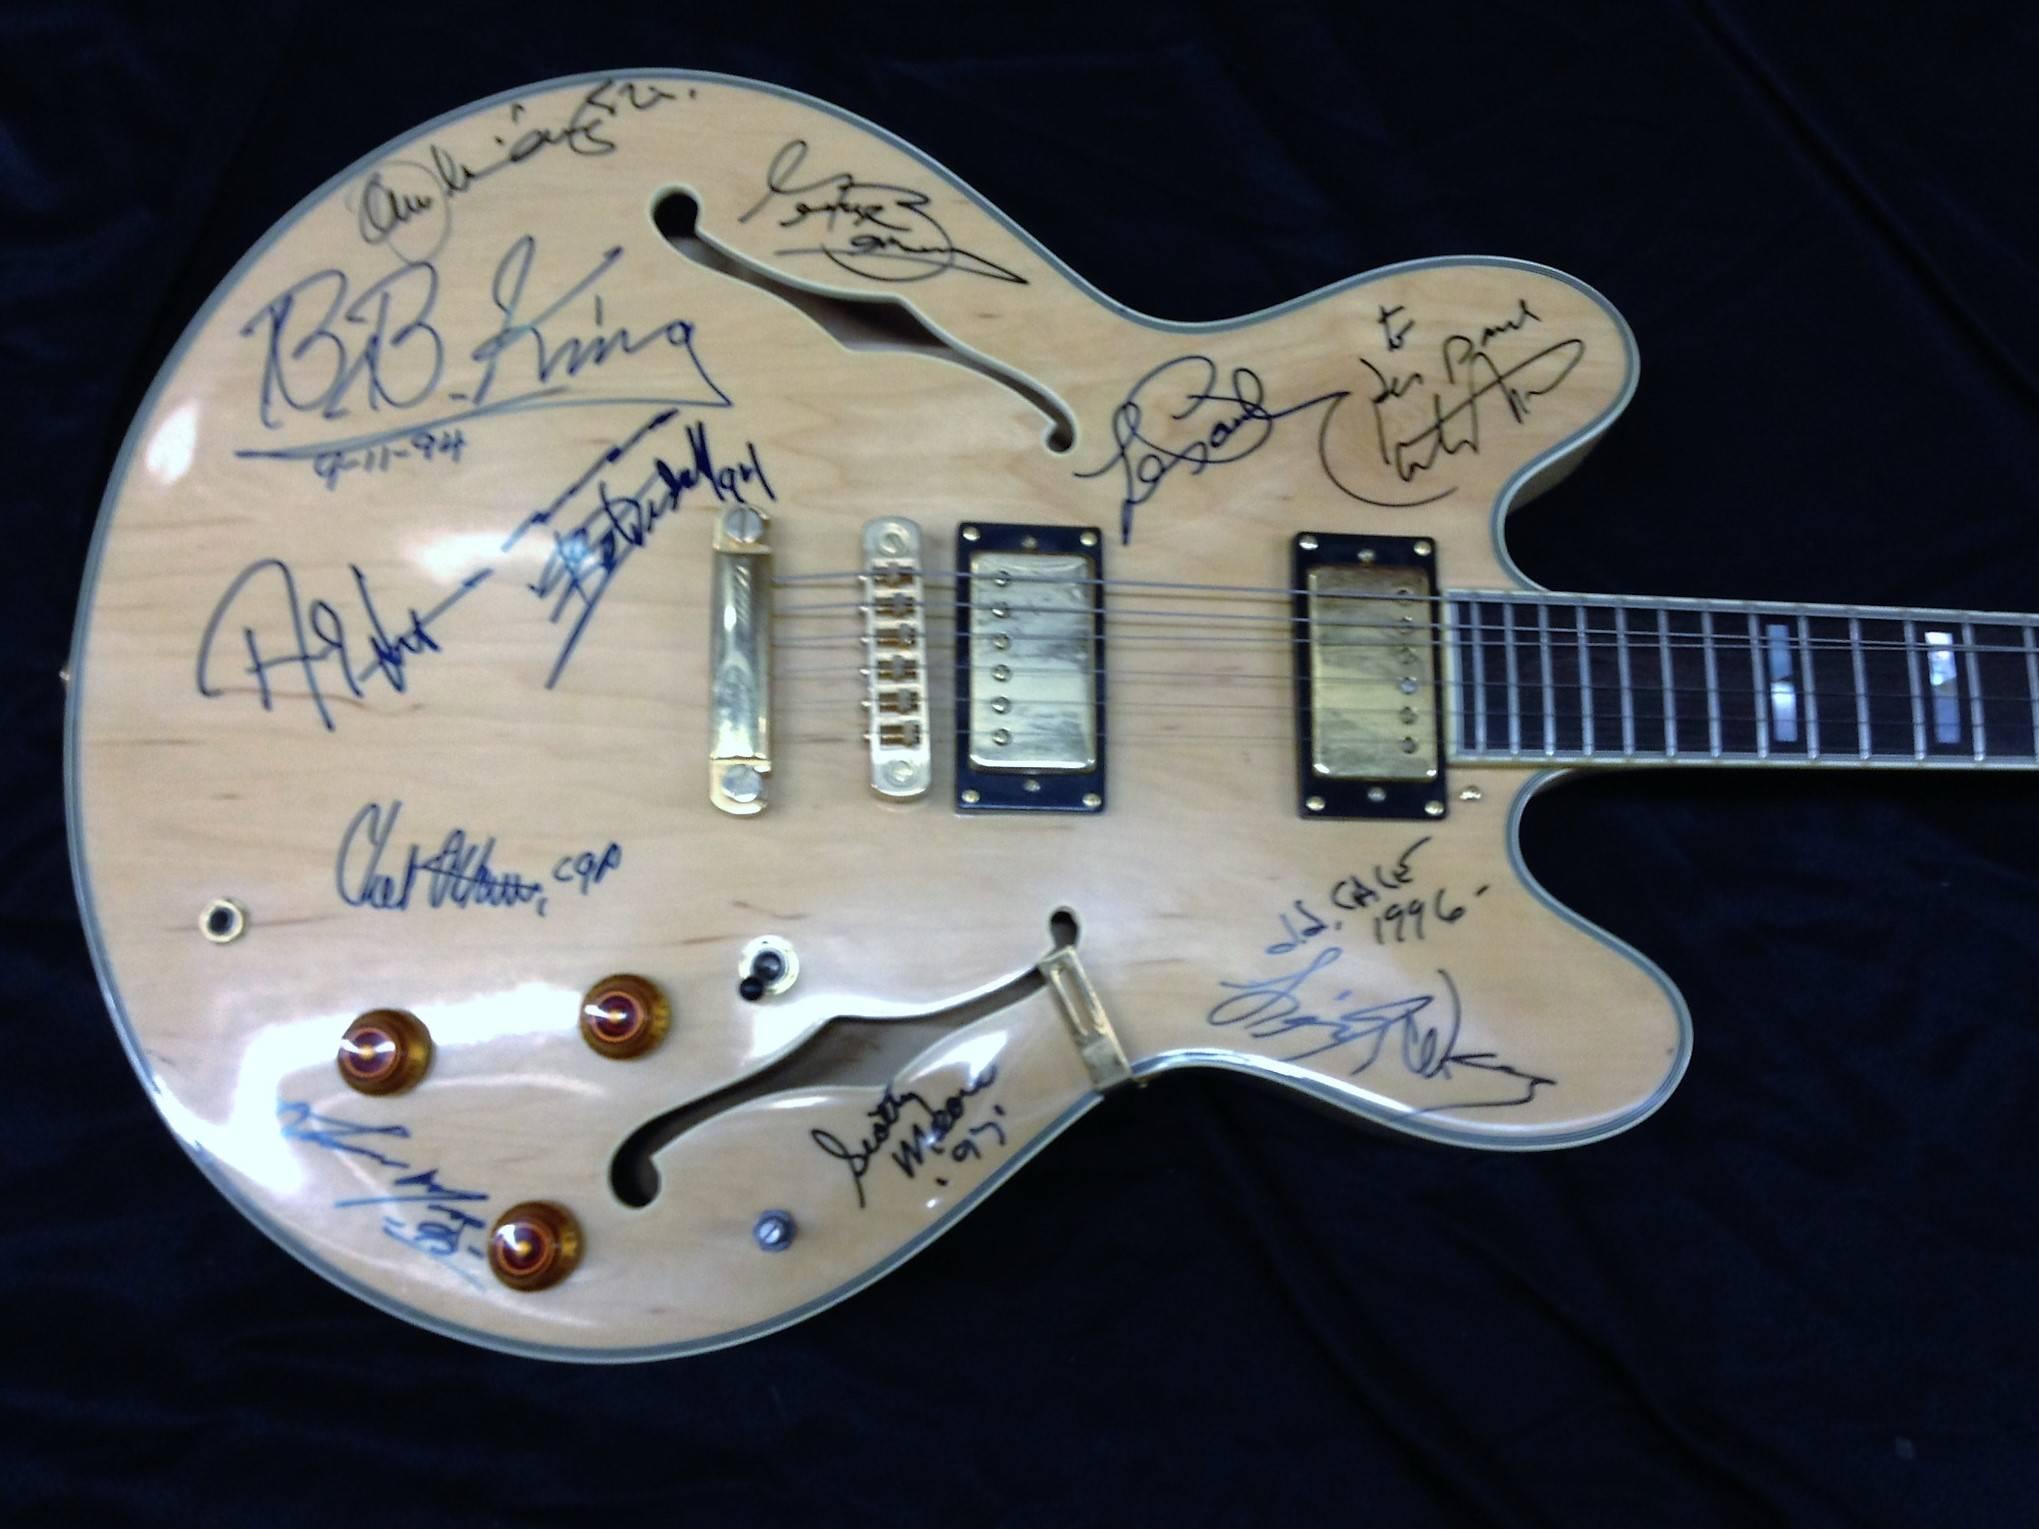 American Rock and Roll Legends Autographed Guitar For Sale